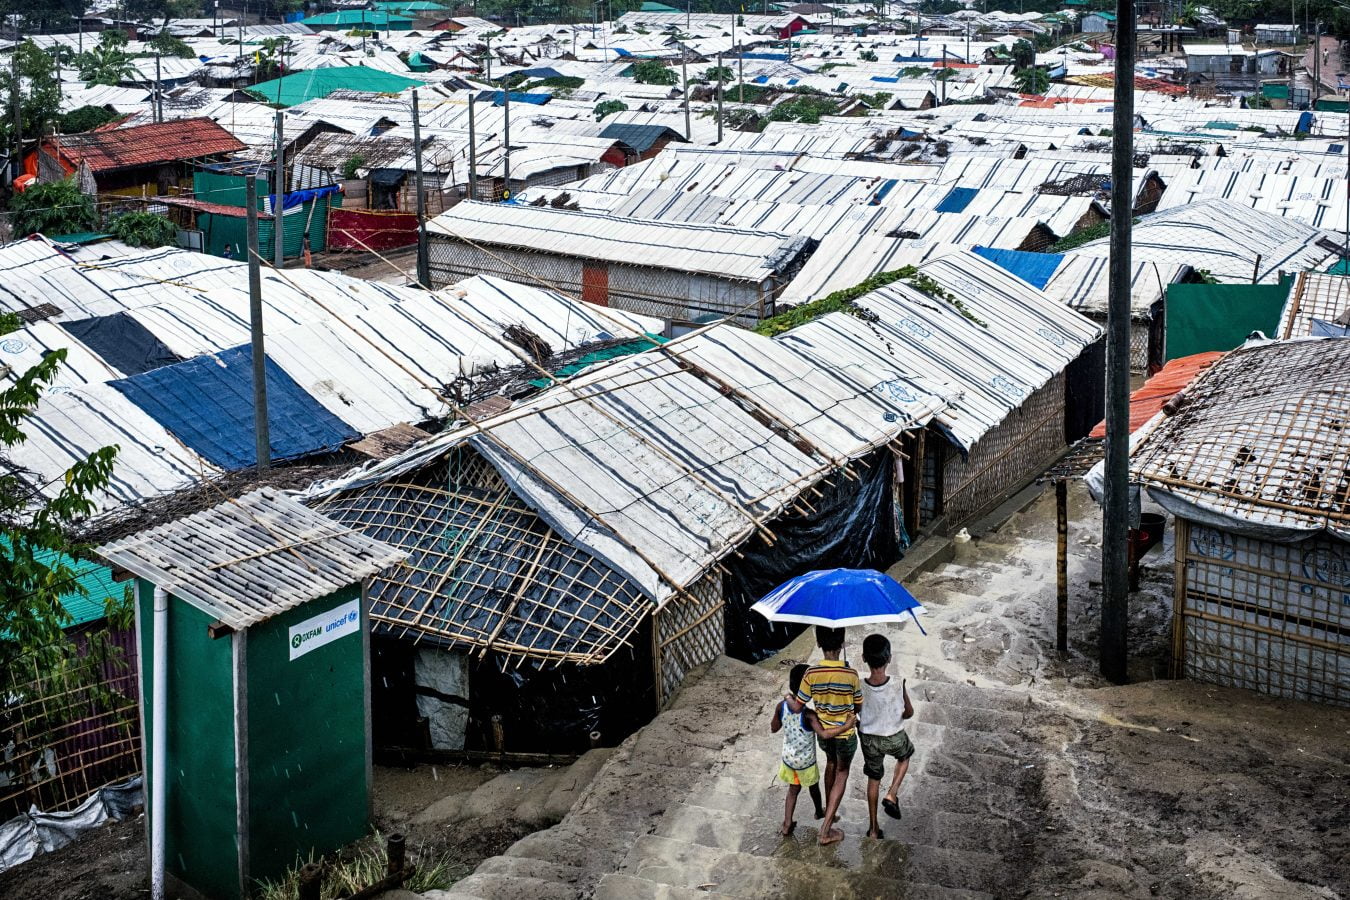 Cox's Bazar is filled to the brim with huts, with barely enough space to make the area liveable.